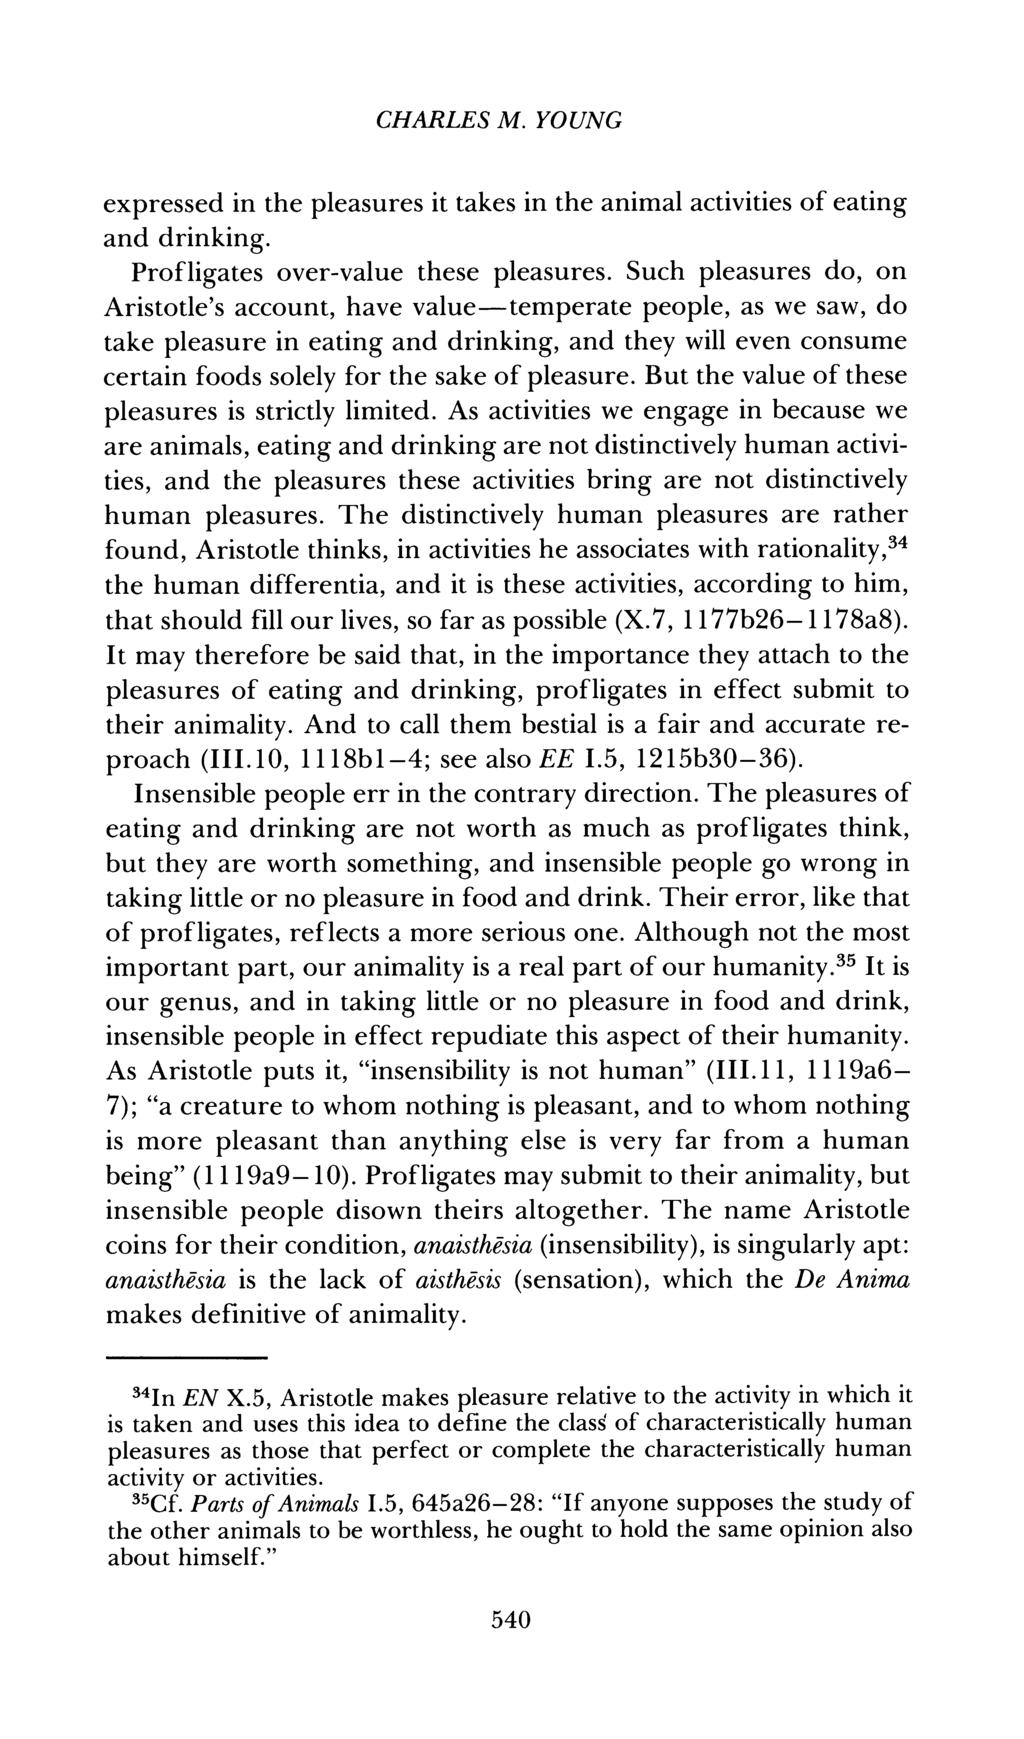 CHARLES M. YOUNG expressed in the pleasures it takes in the animal activities of eating and drinking. Profligates over-value these pleasures.